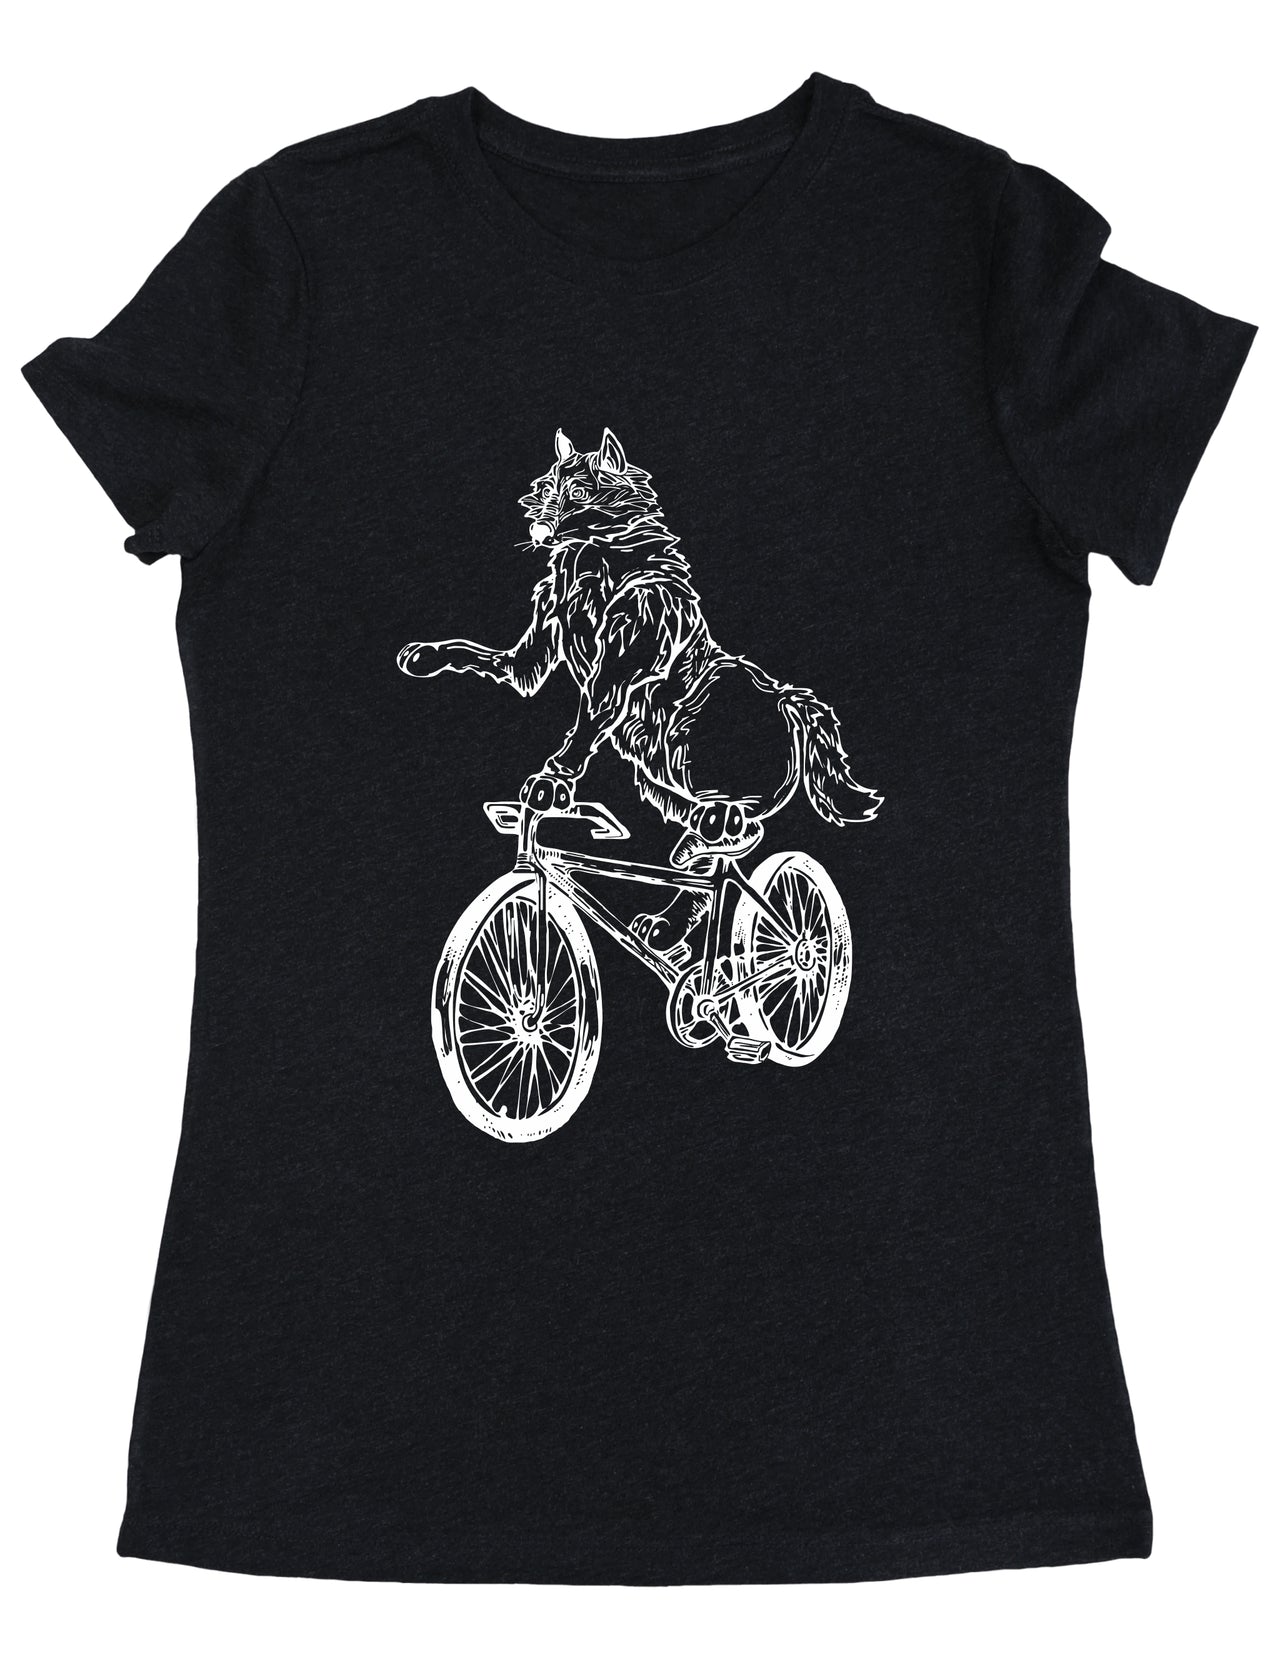 SEEMBO Wolf Cycling Bicycle Women's Tri-Blend T-Shirt